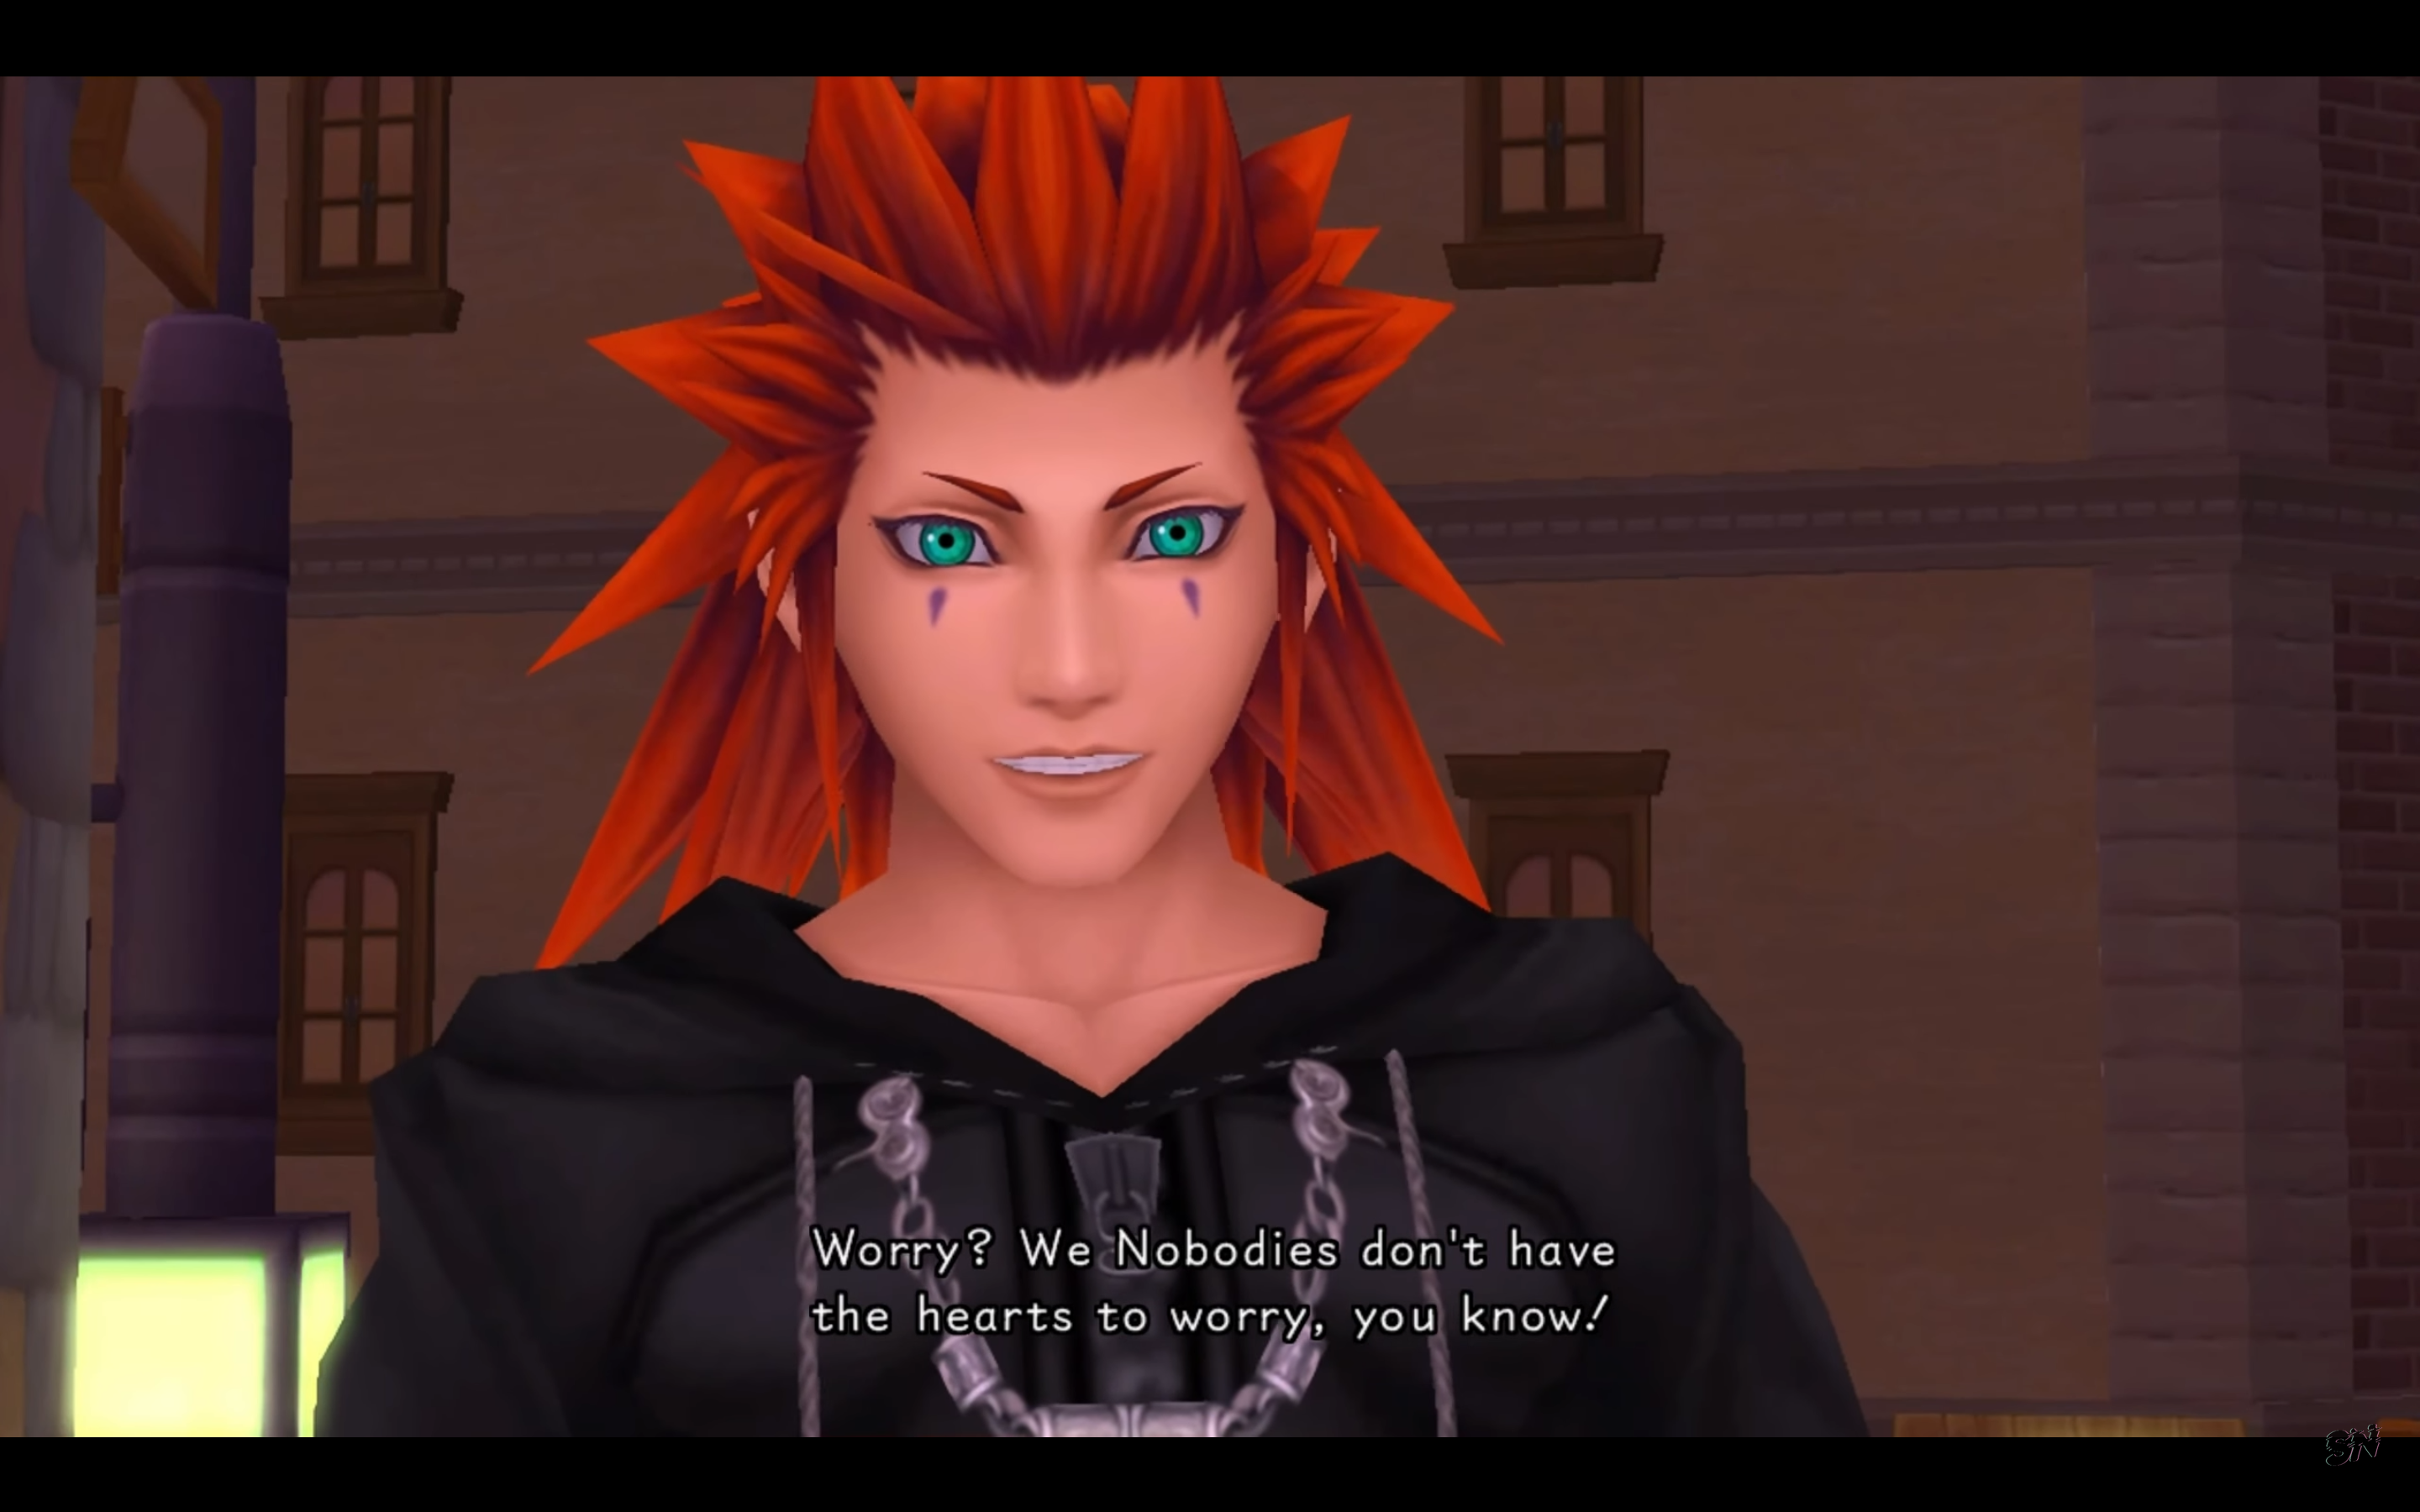 "Kingdom Hearts: 358/2 Days". 2009. Square Enix.
Axel making light of his disappearance.